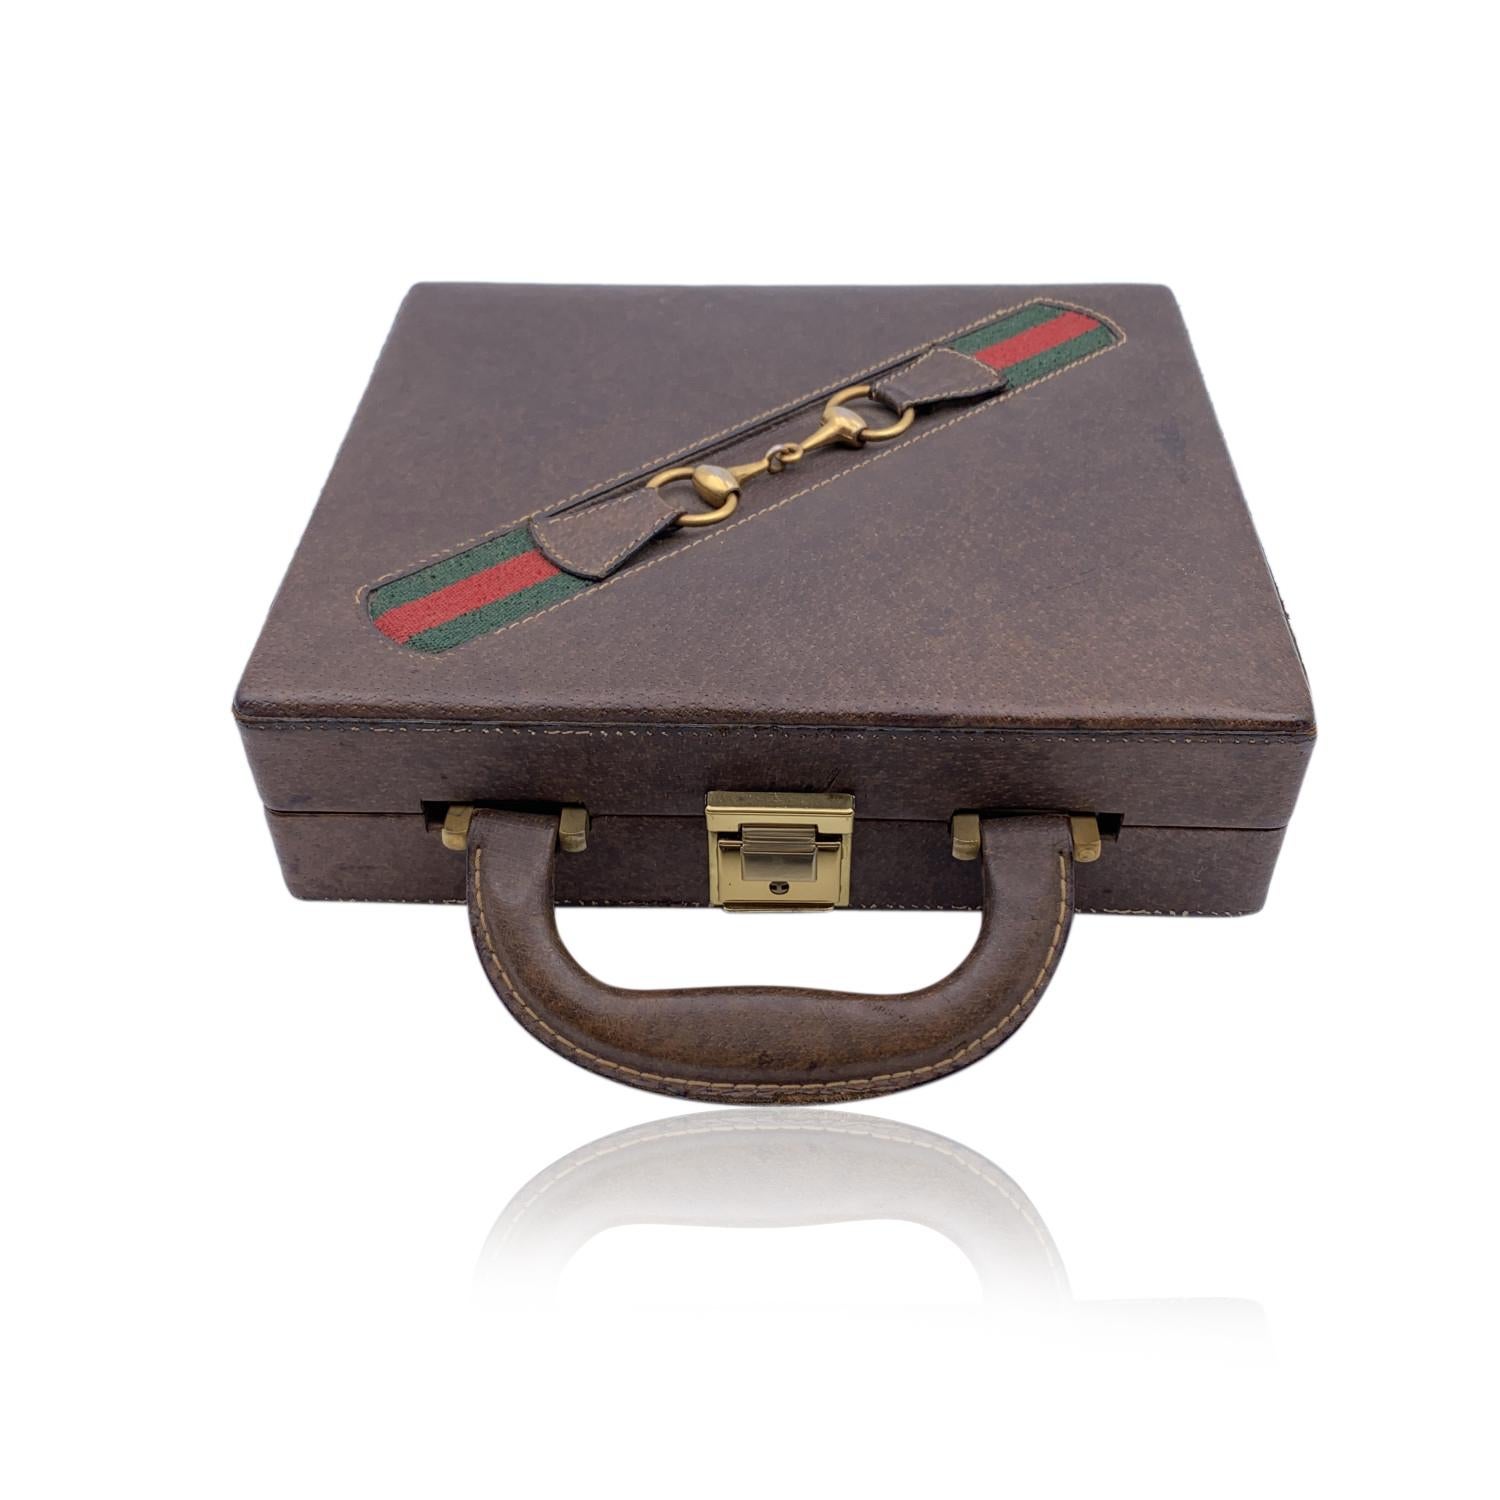 Rare travel poker set was made by Gucci, from the 70s. The travel case is made from dark pigskin leather and features Gucci's iconic green/red/green striping with a gold metal horsebit. The case is lined in green felt and it has one divider tray.